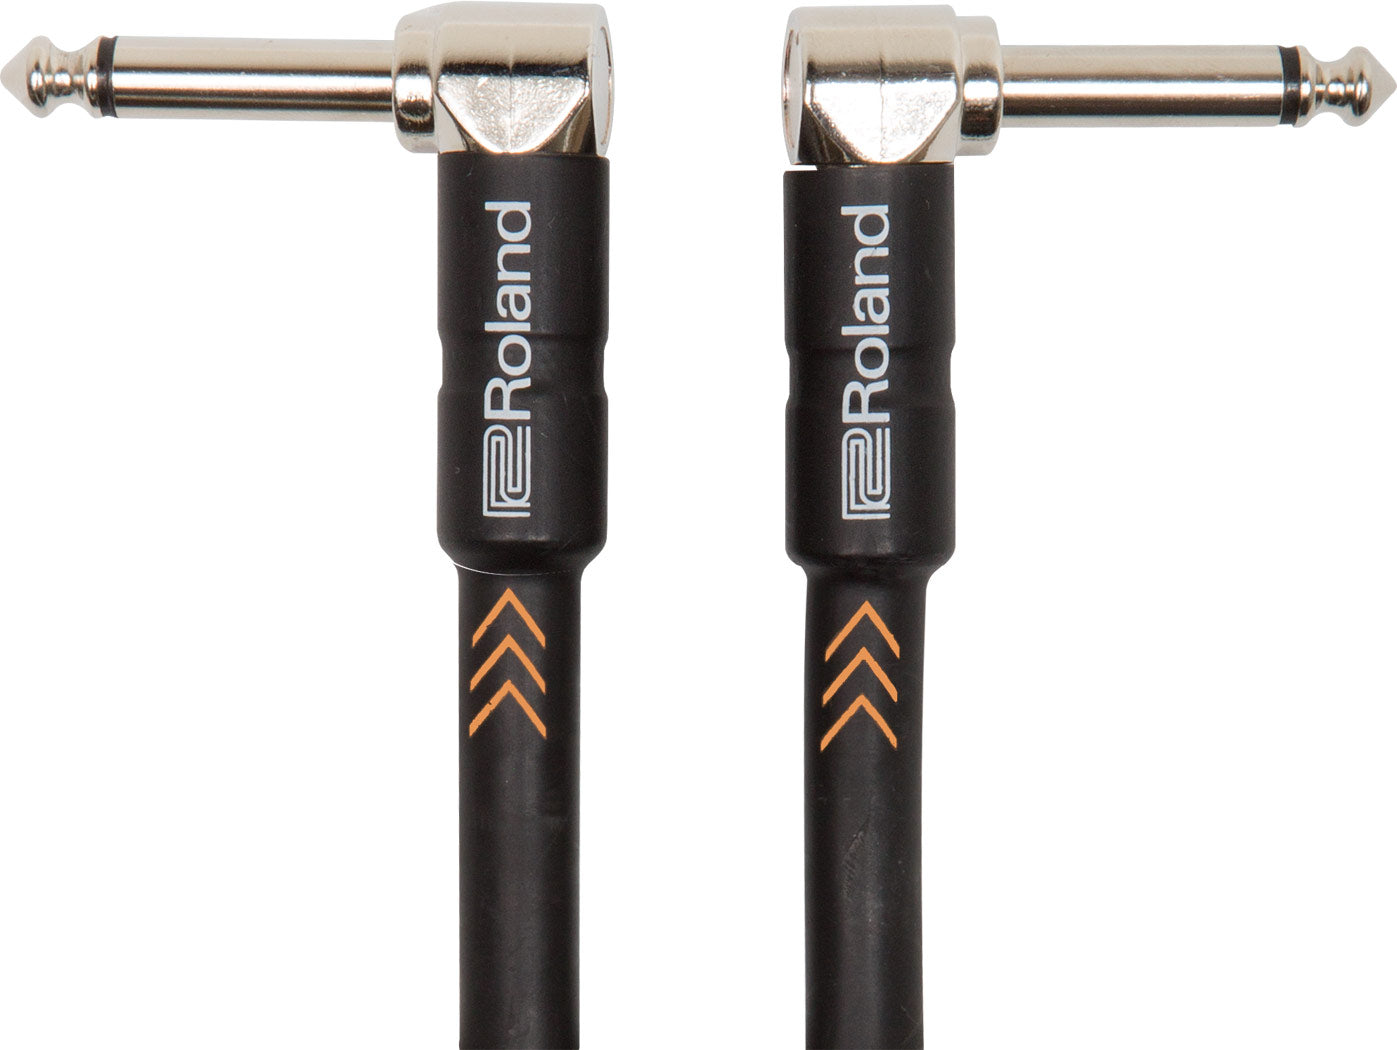 Roland RIC-BPC Instrument Cable, 6"/15cm, Angled/Angled 1/4" Jack, Black Series